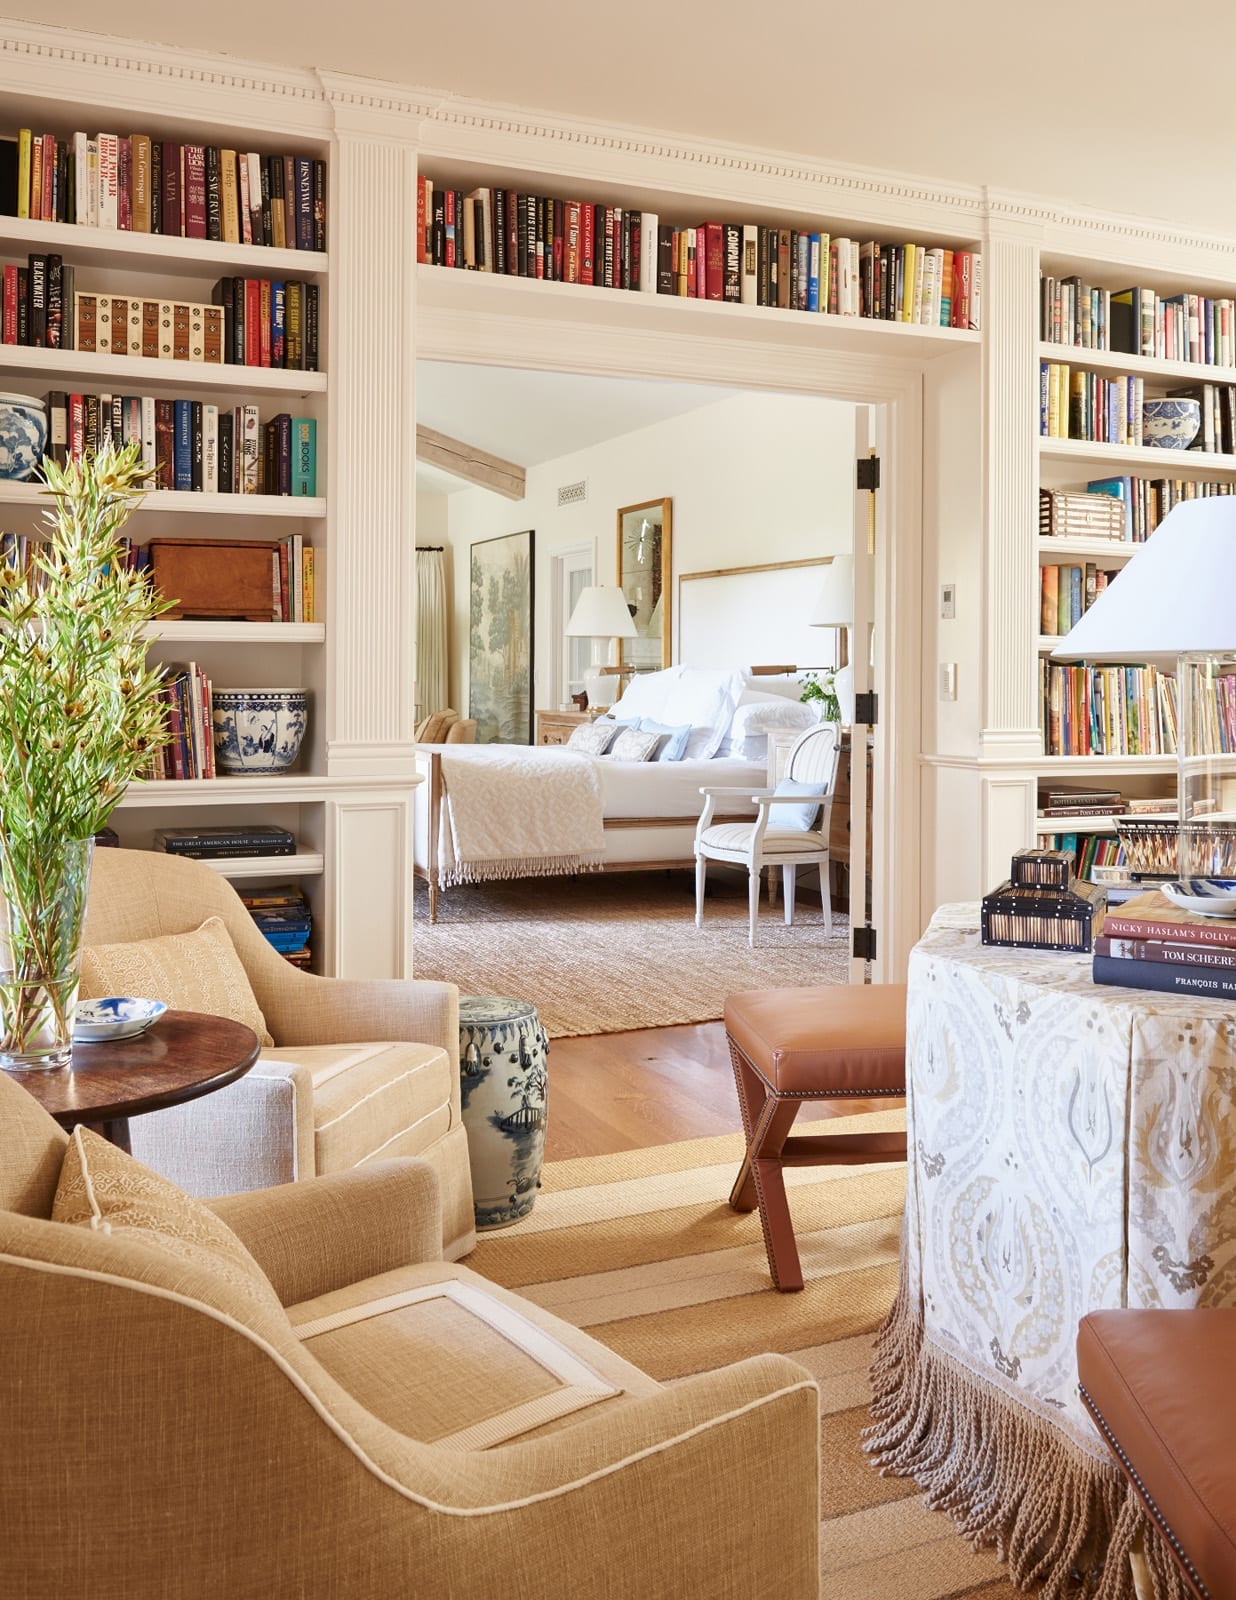 10 efforrtlessly styled bookcases - Mark D. Sikes Interiors _ Amy Neunsinger Photography - books - bookcases - living room - family room - round table